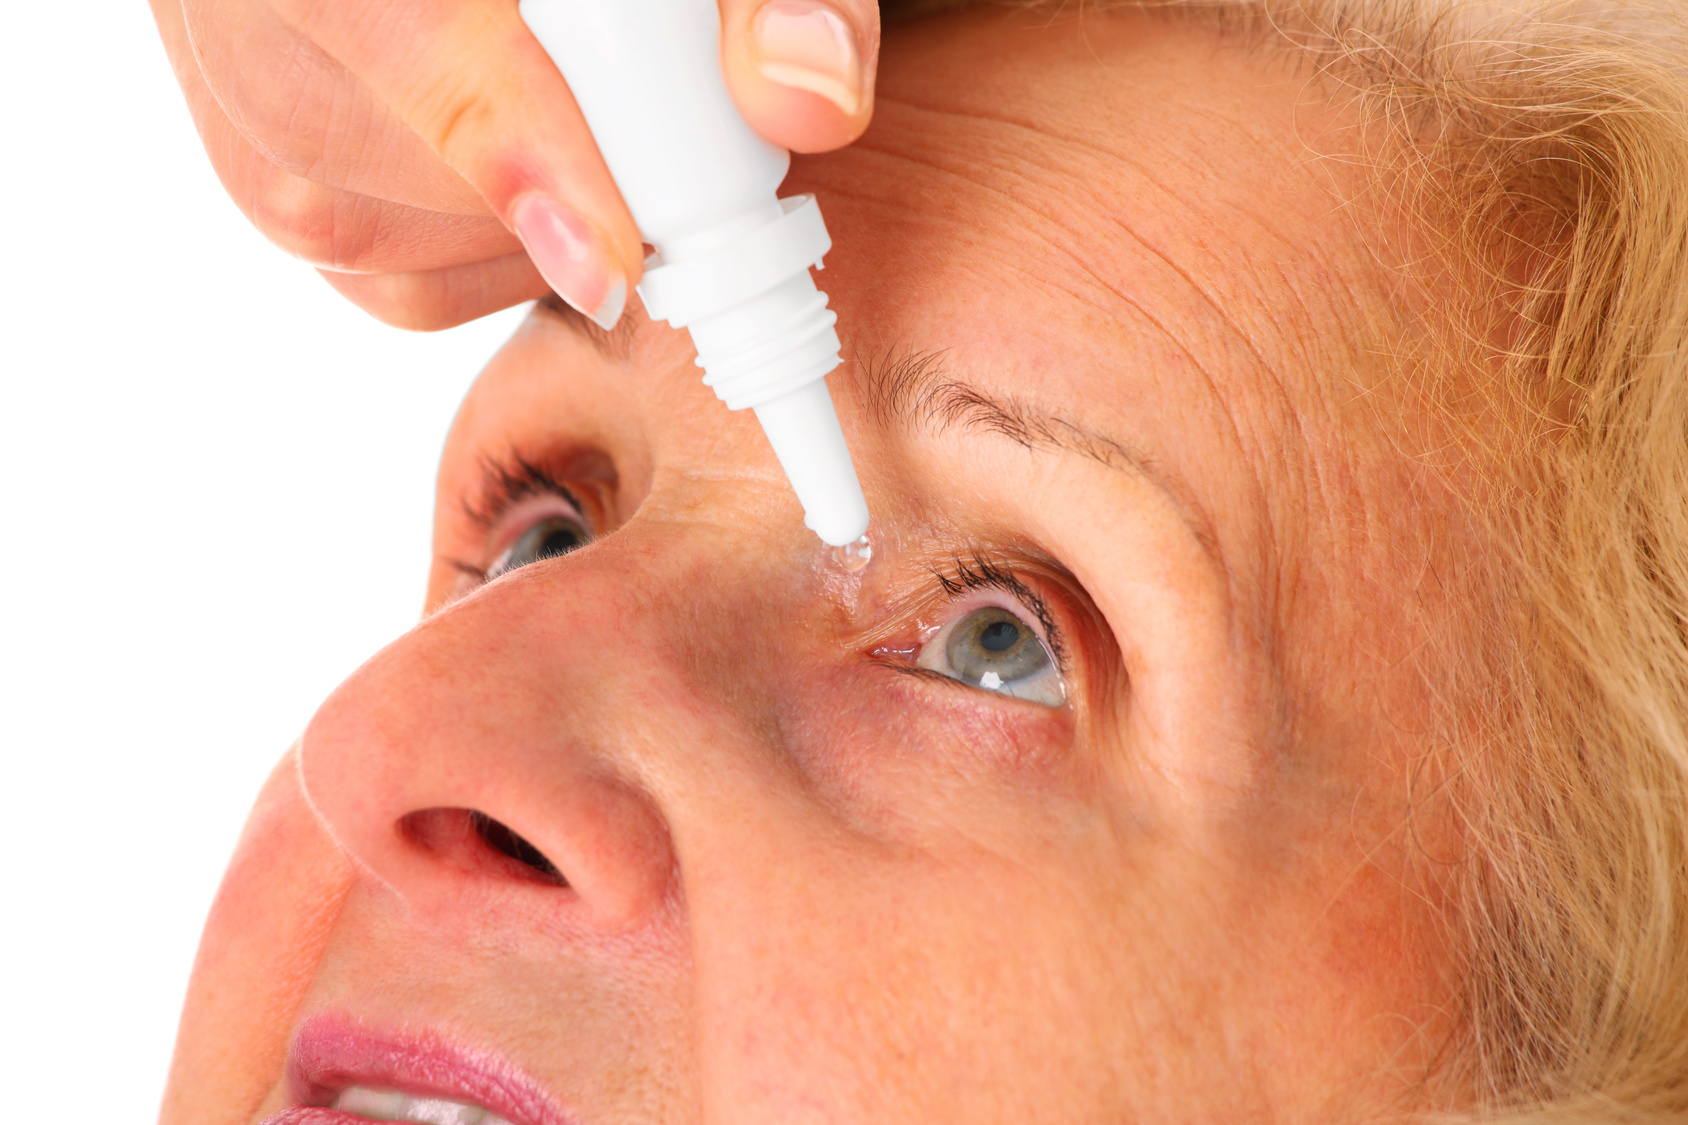 What Types of Eye Drops Help Glaucoma?